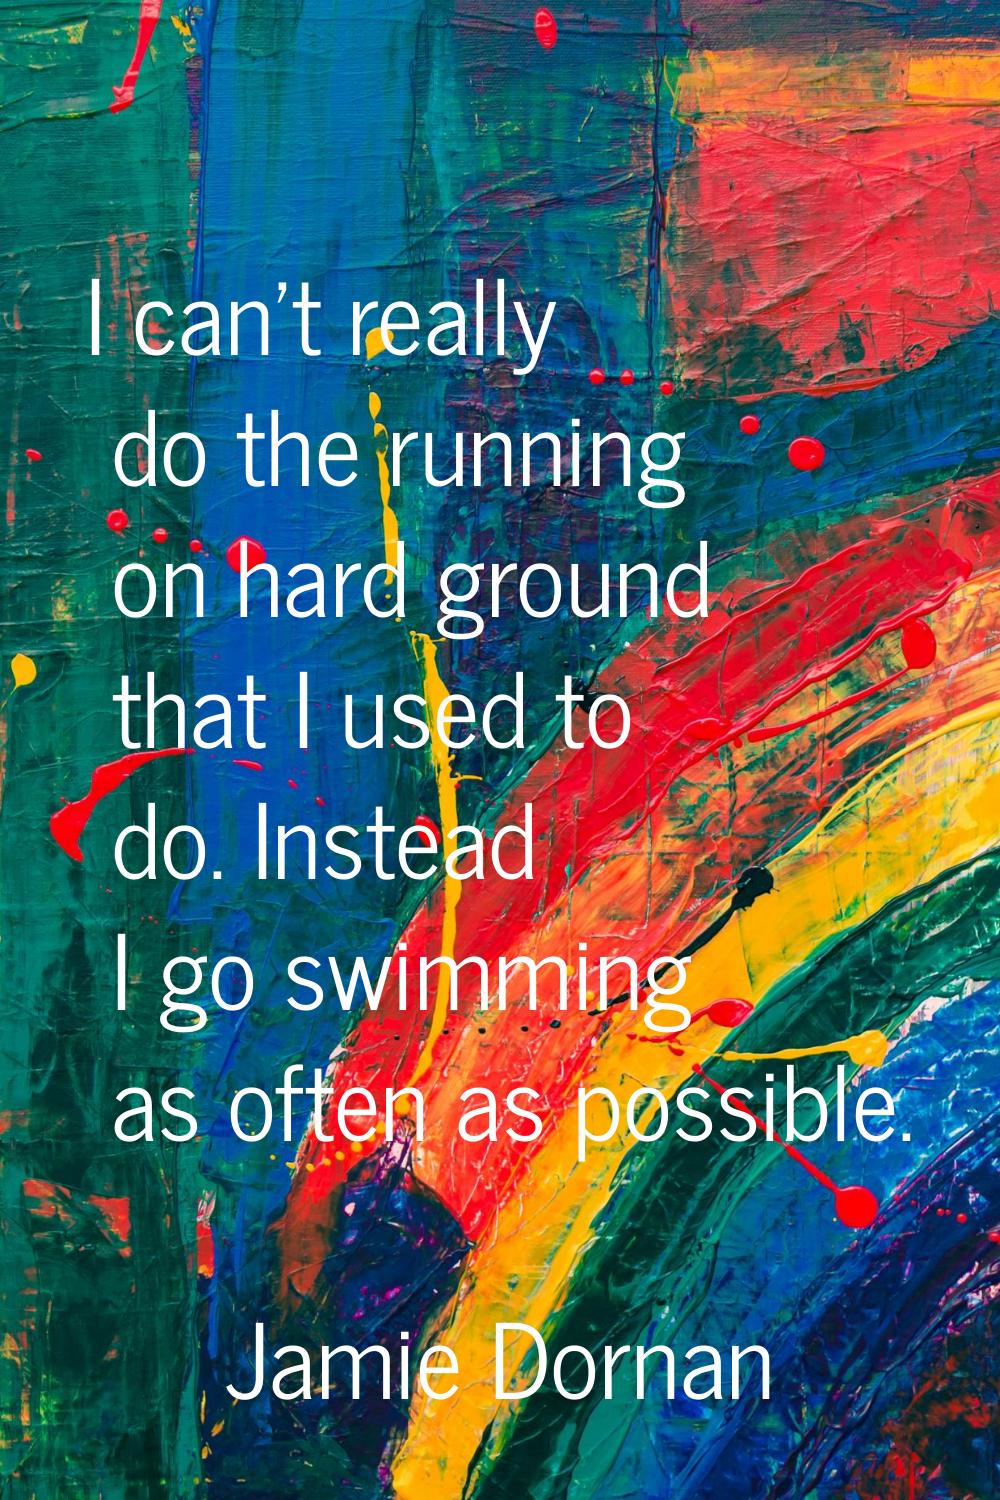 I can't really do the running on hard ground that I used to do. Instead I go swimming as often as p